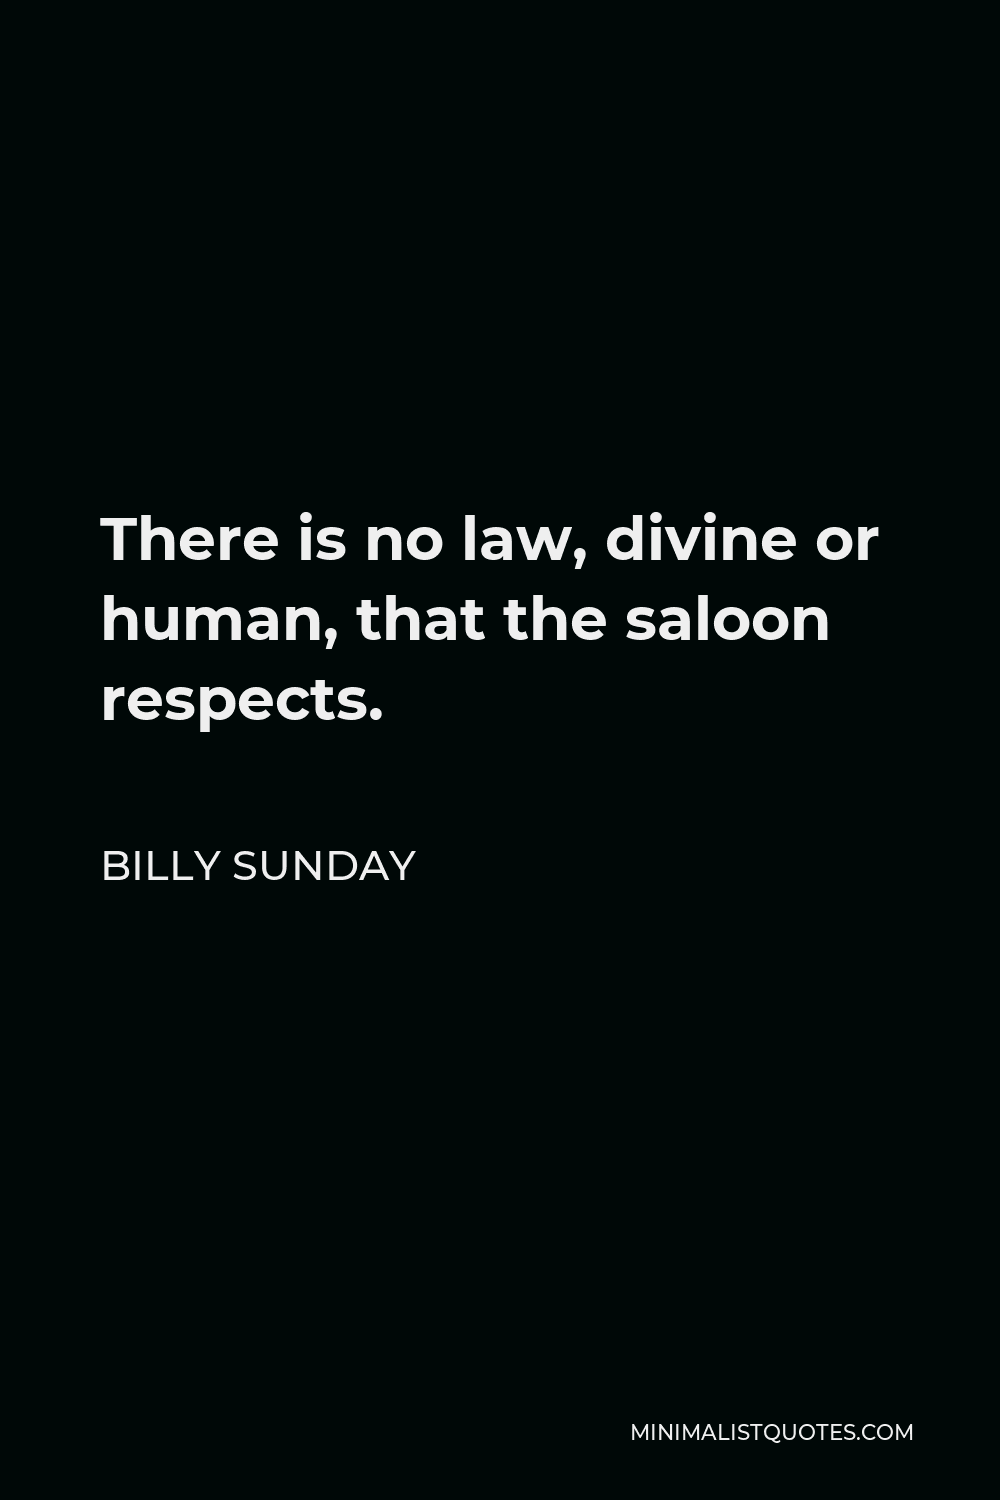 Billy Sunday Quote - There is no law, divine or human, that the saloon respects.